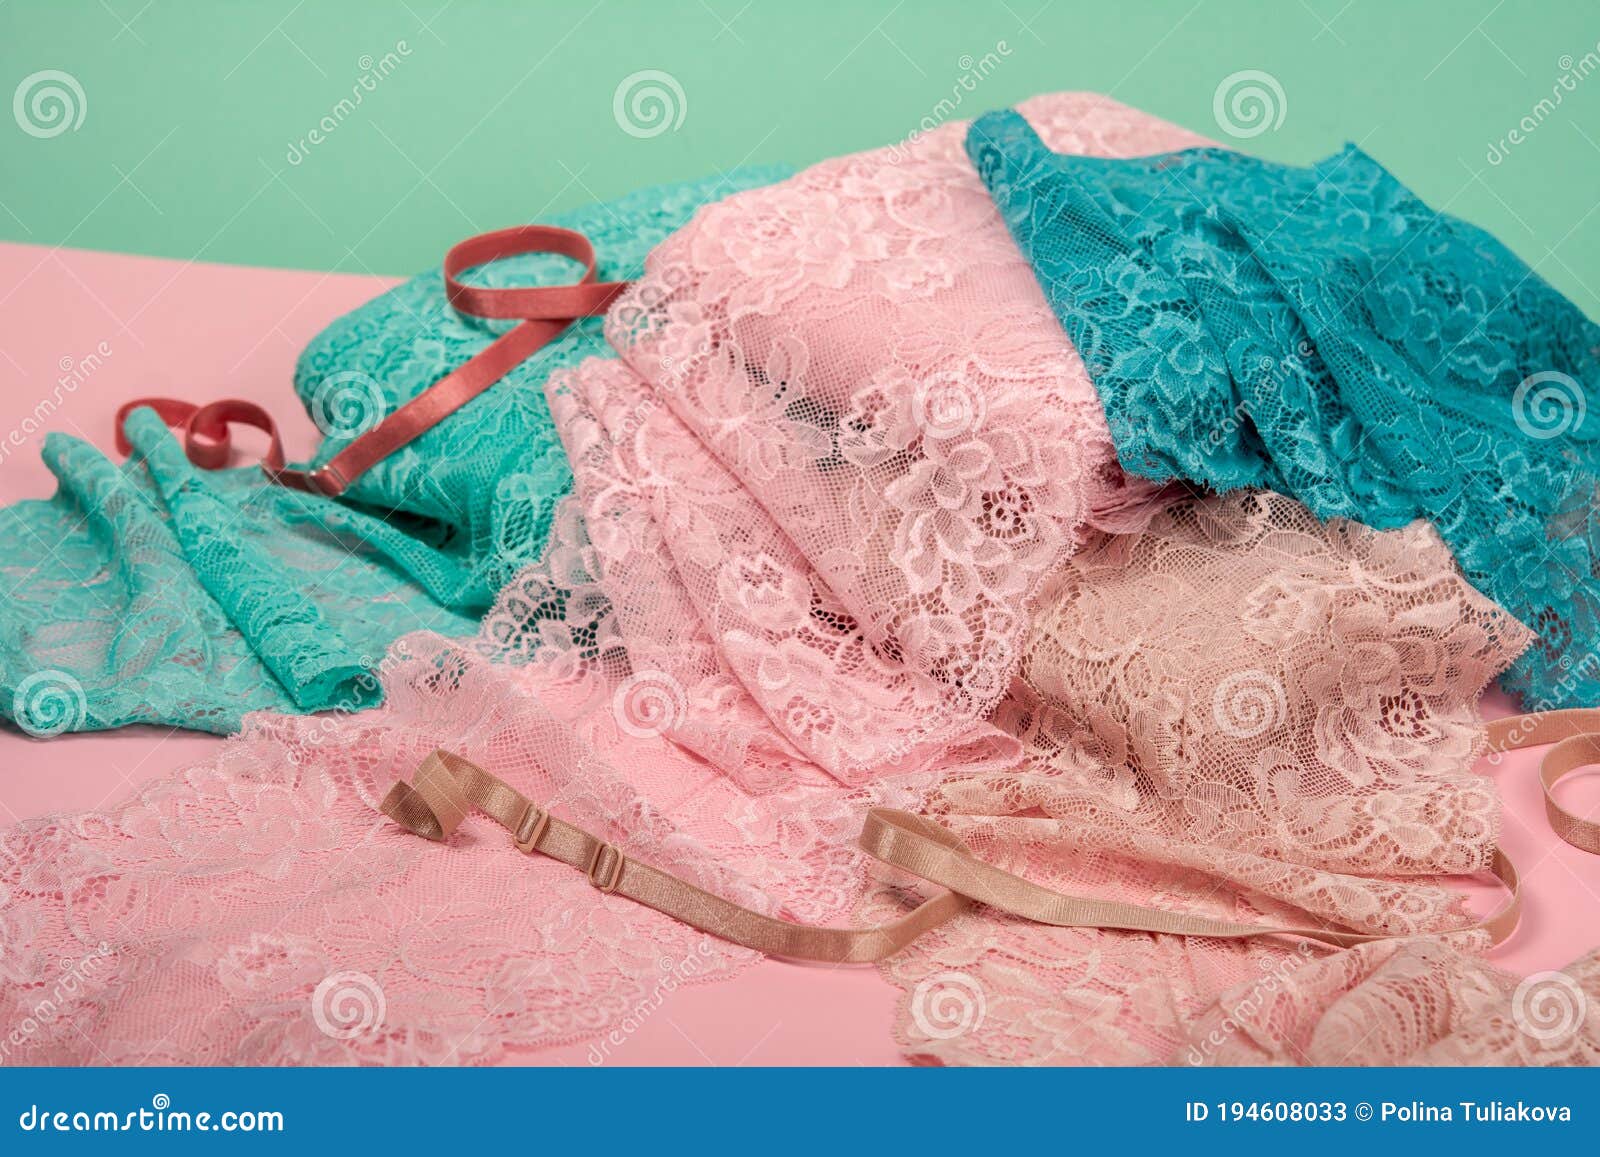 Pile of Color Rich Bright Lace for Lingerie, Panties, and Bras on Pink  Background Stock Image - Image of atelier, green: 194608033